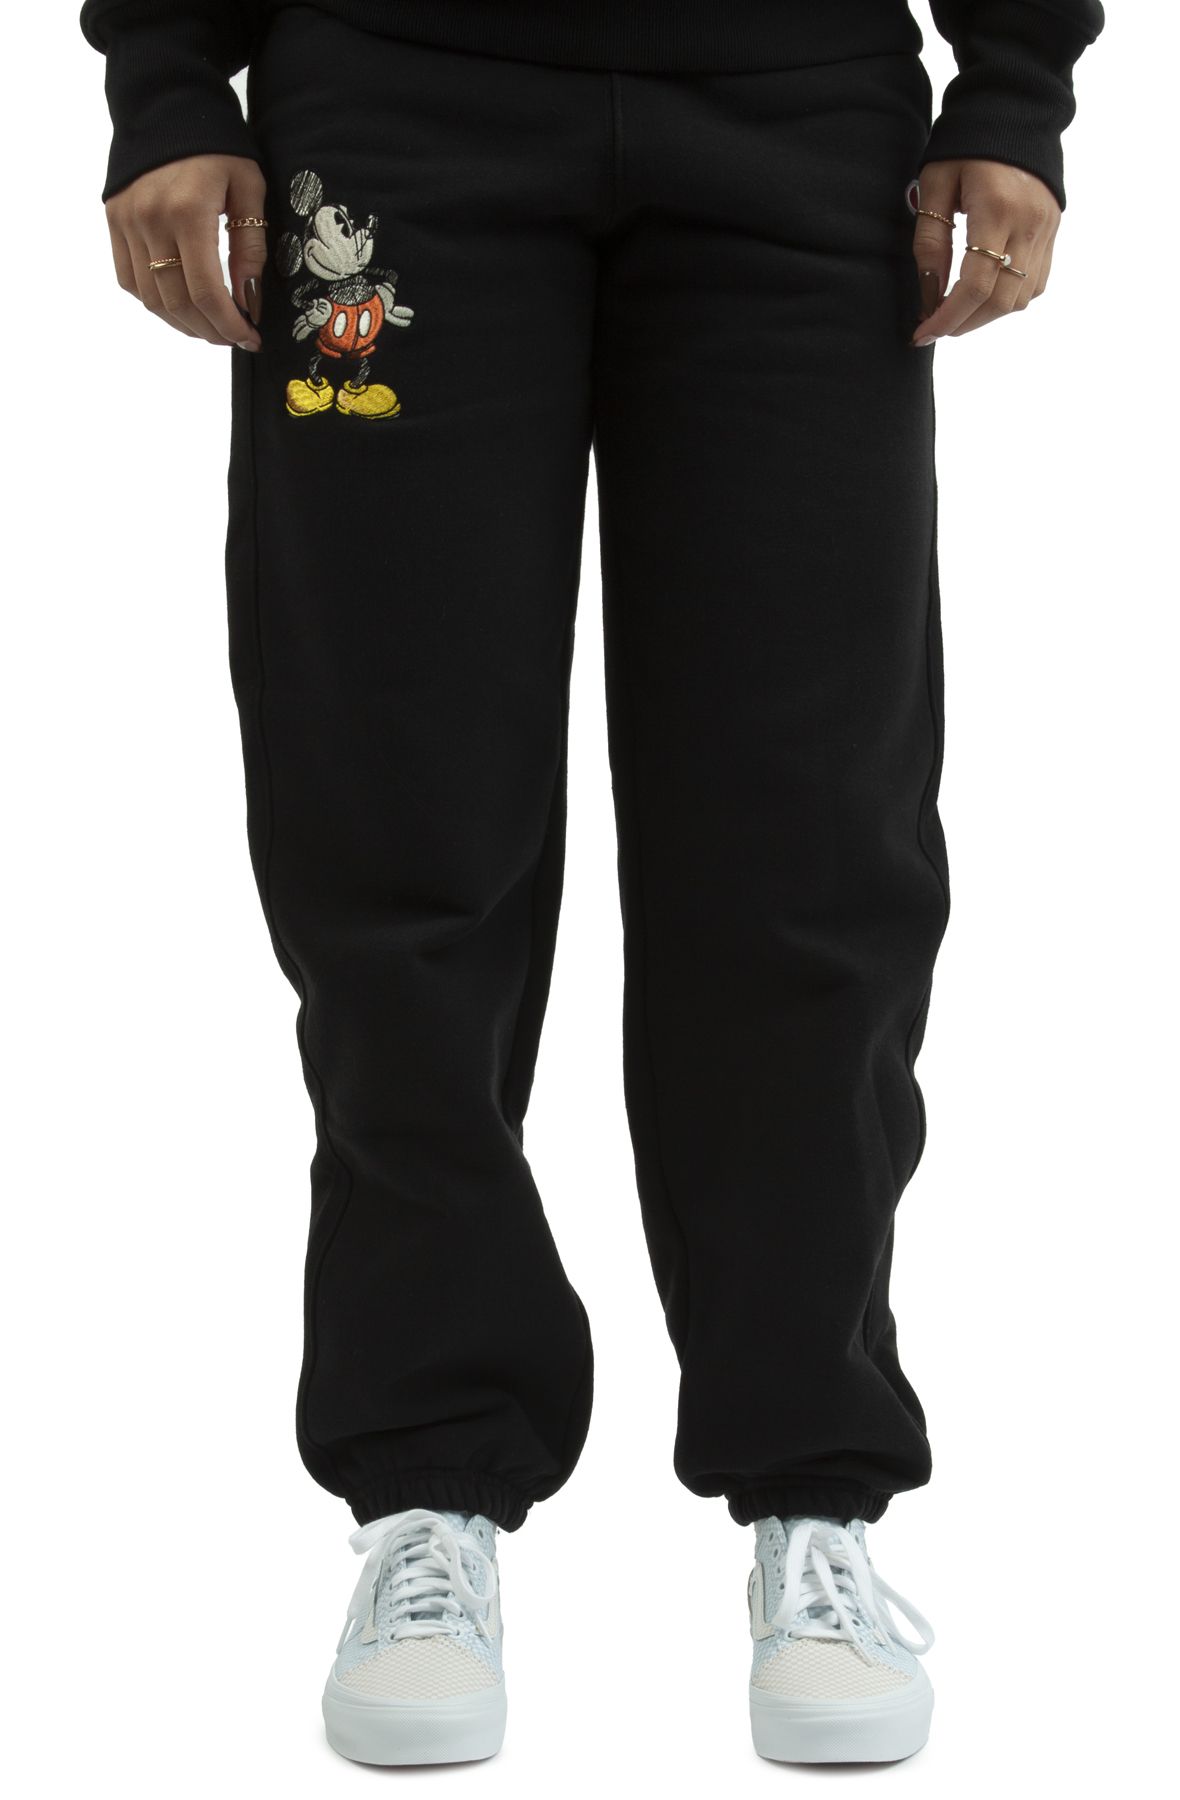 Mickey Mouse Sweatpants for Adults, Disney Store